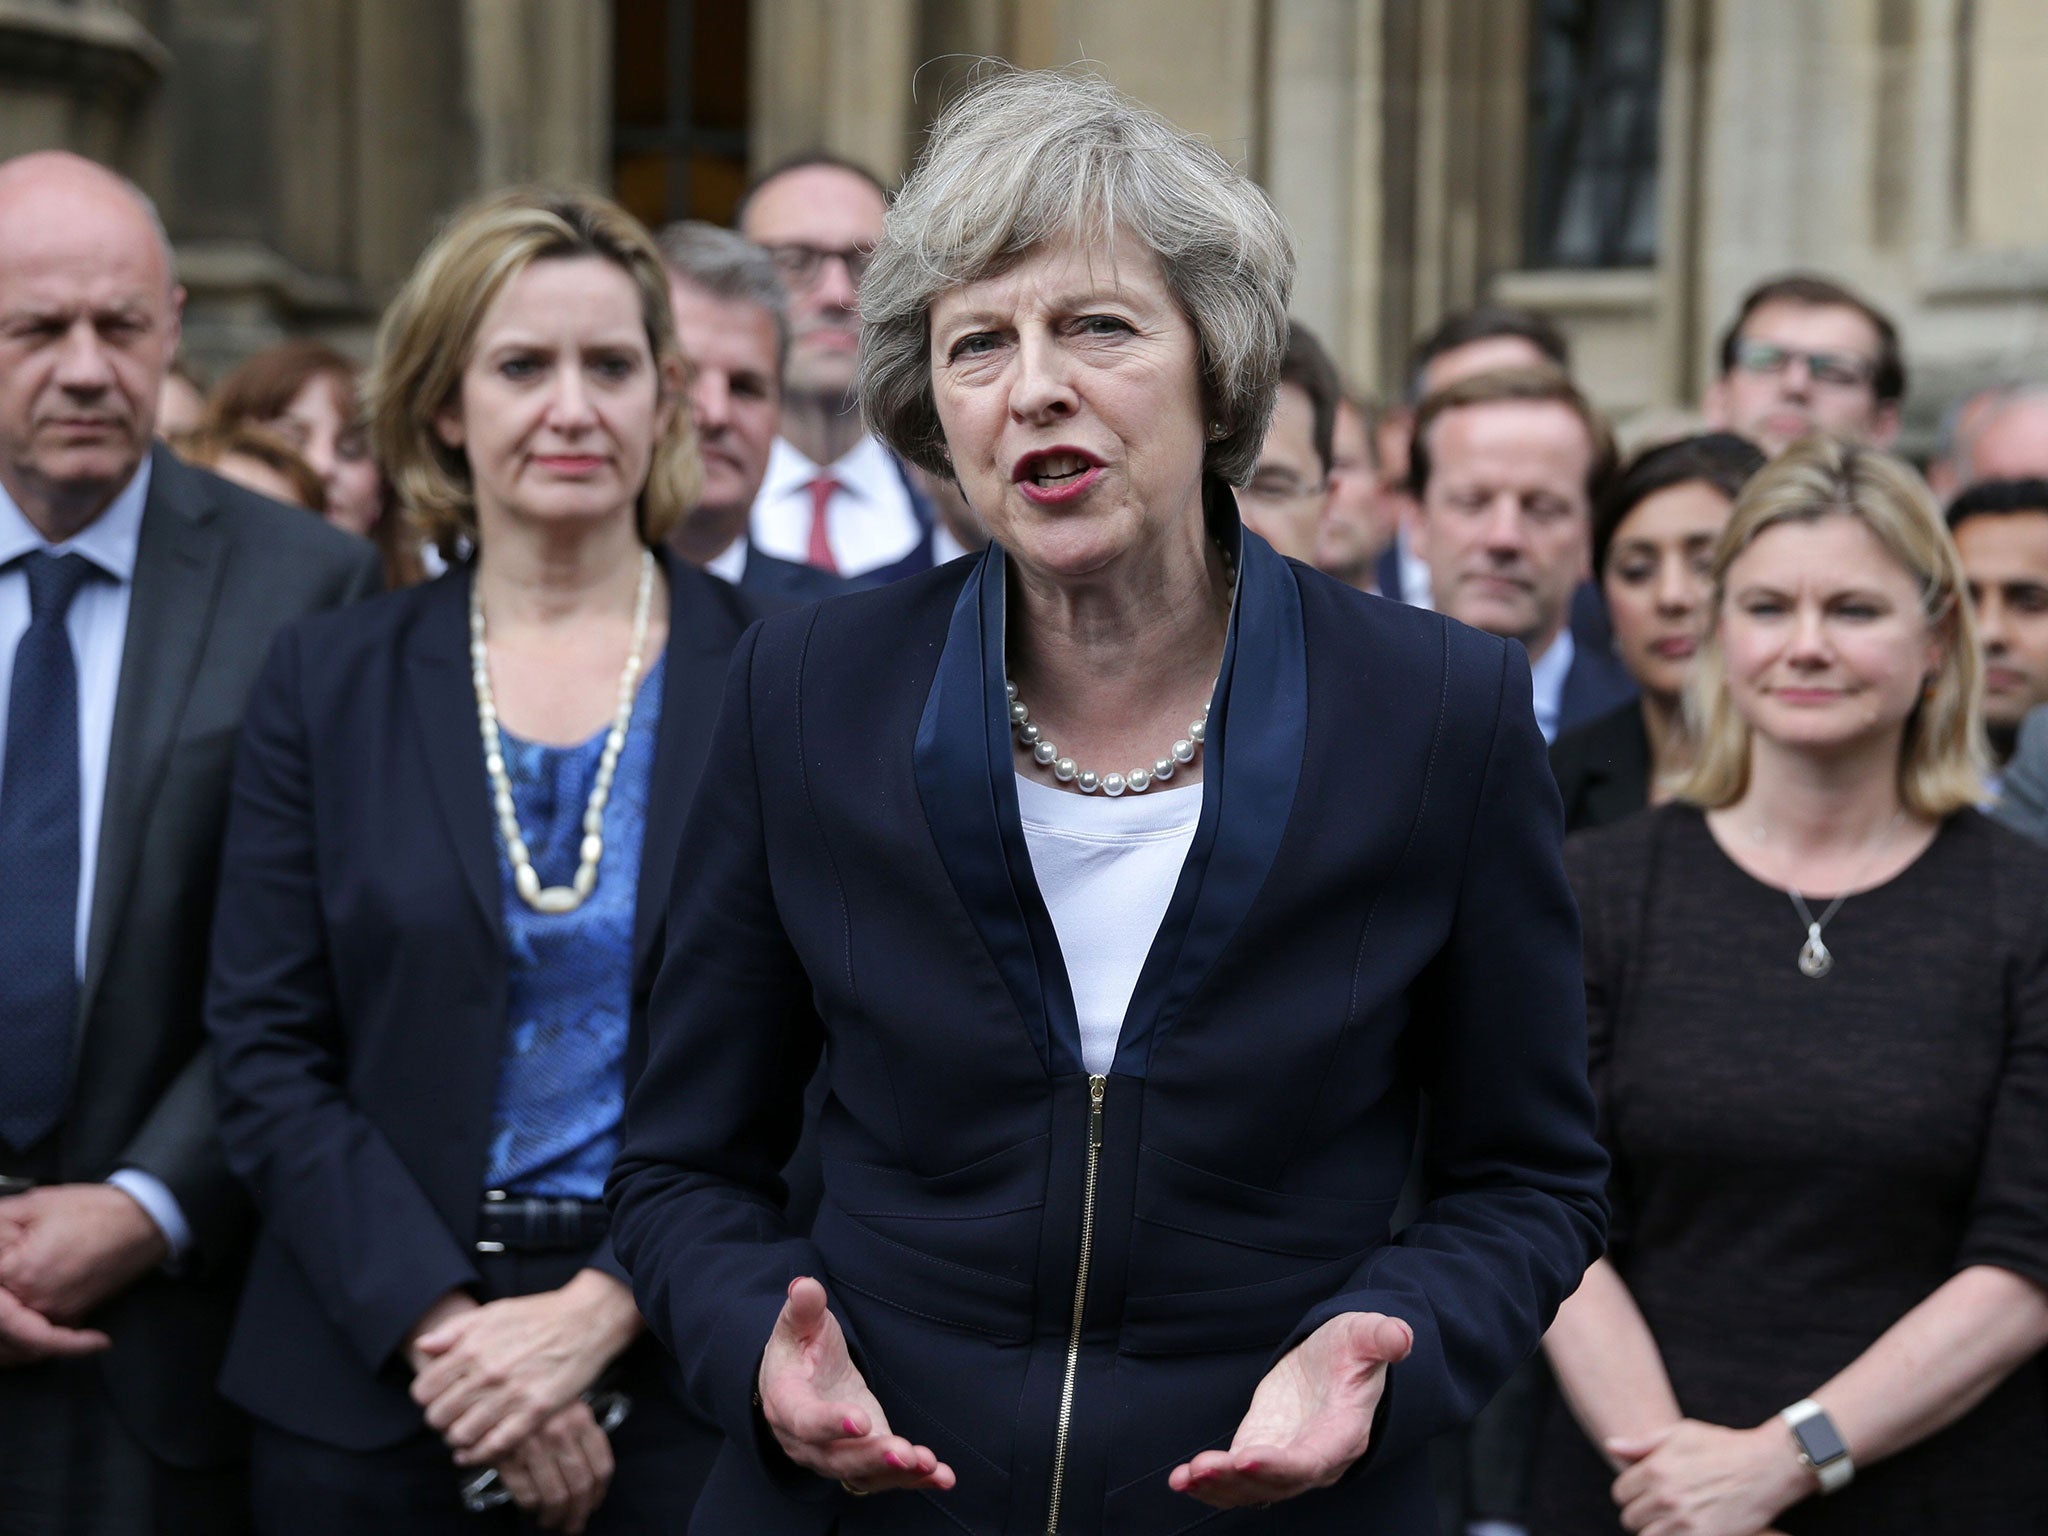 Britain's new Conservative Party leader Theresa May (C) speaks to members of the media at The St Stephen's entrance to the Palace of Westminster in London on July 11, 2016